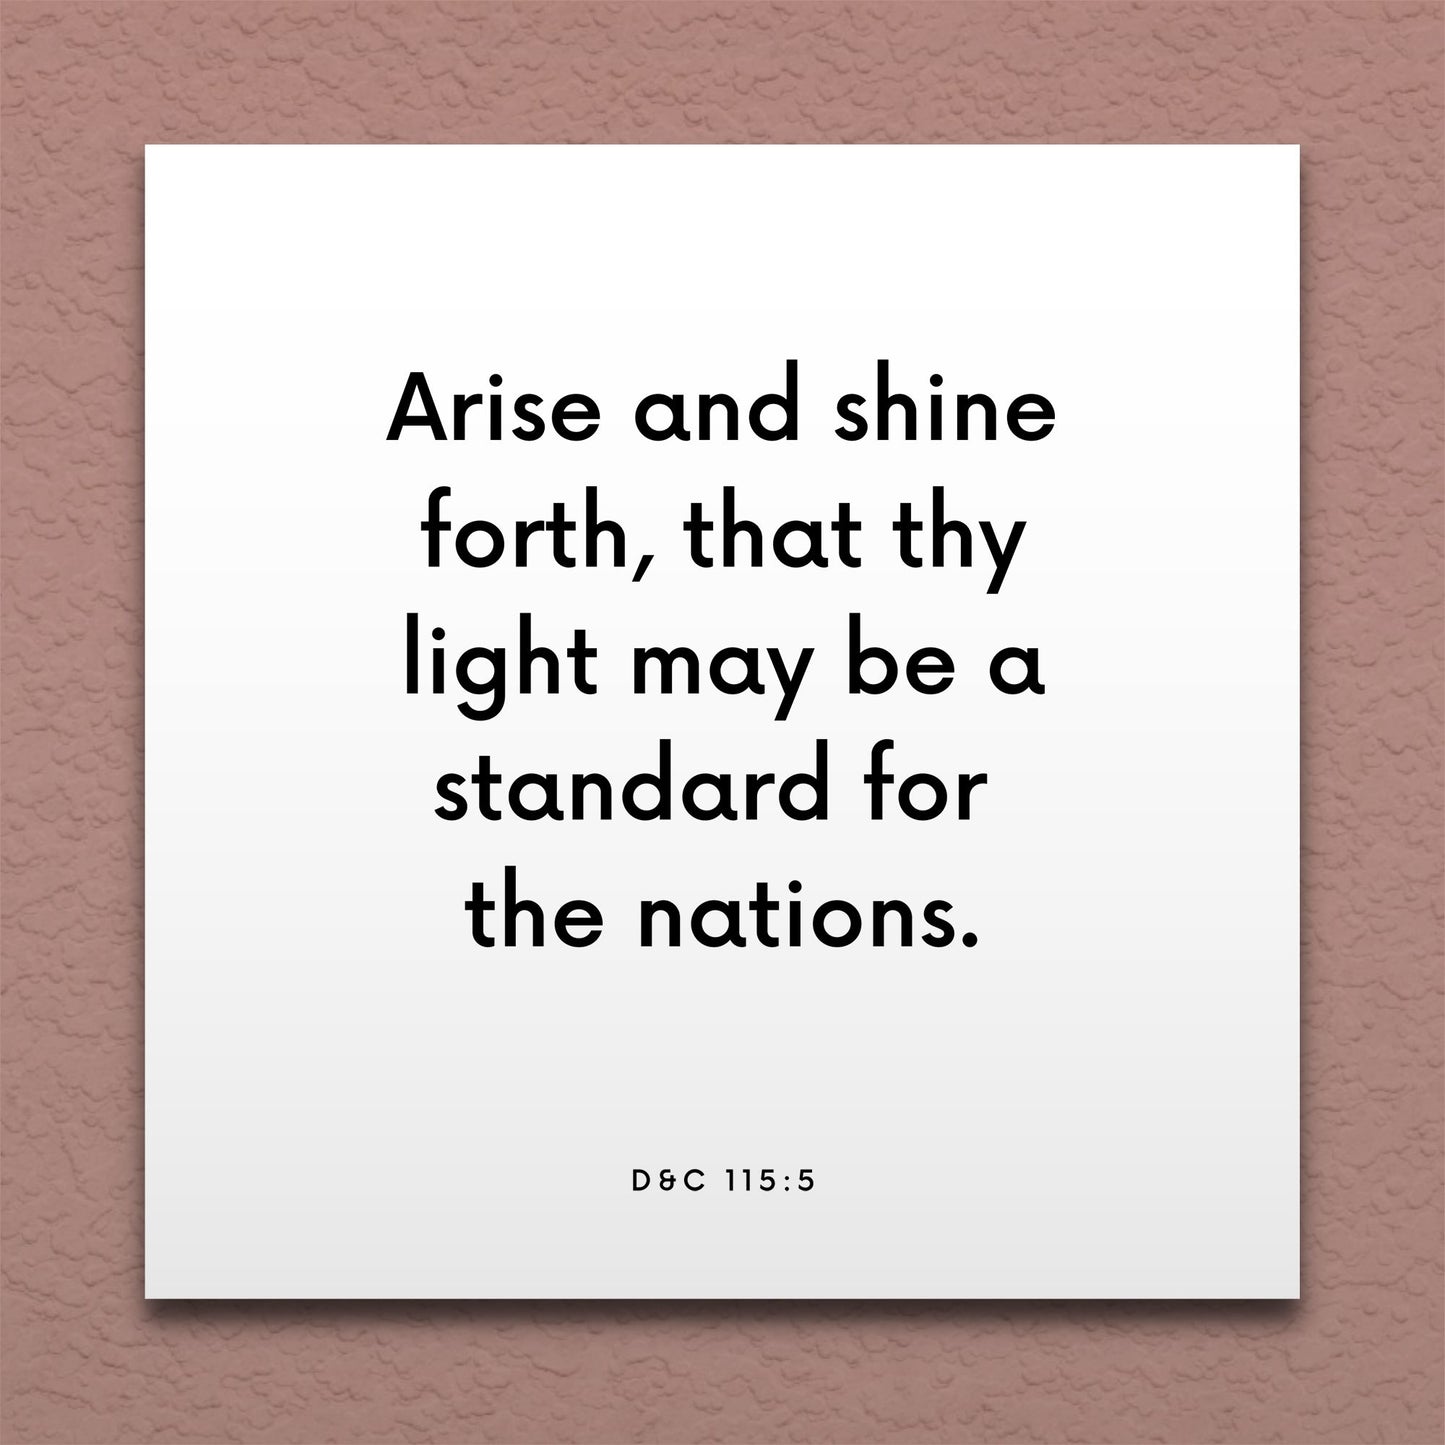 Wall-mounted scripture tile for D&C 115:5 - "Arise and shine forth, that thy light may be a standard"